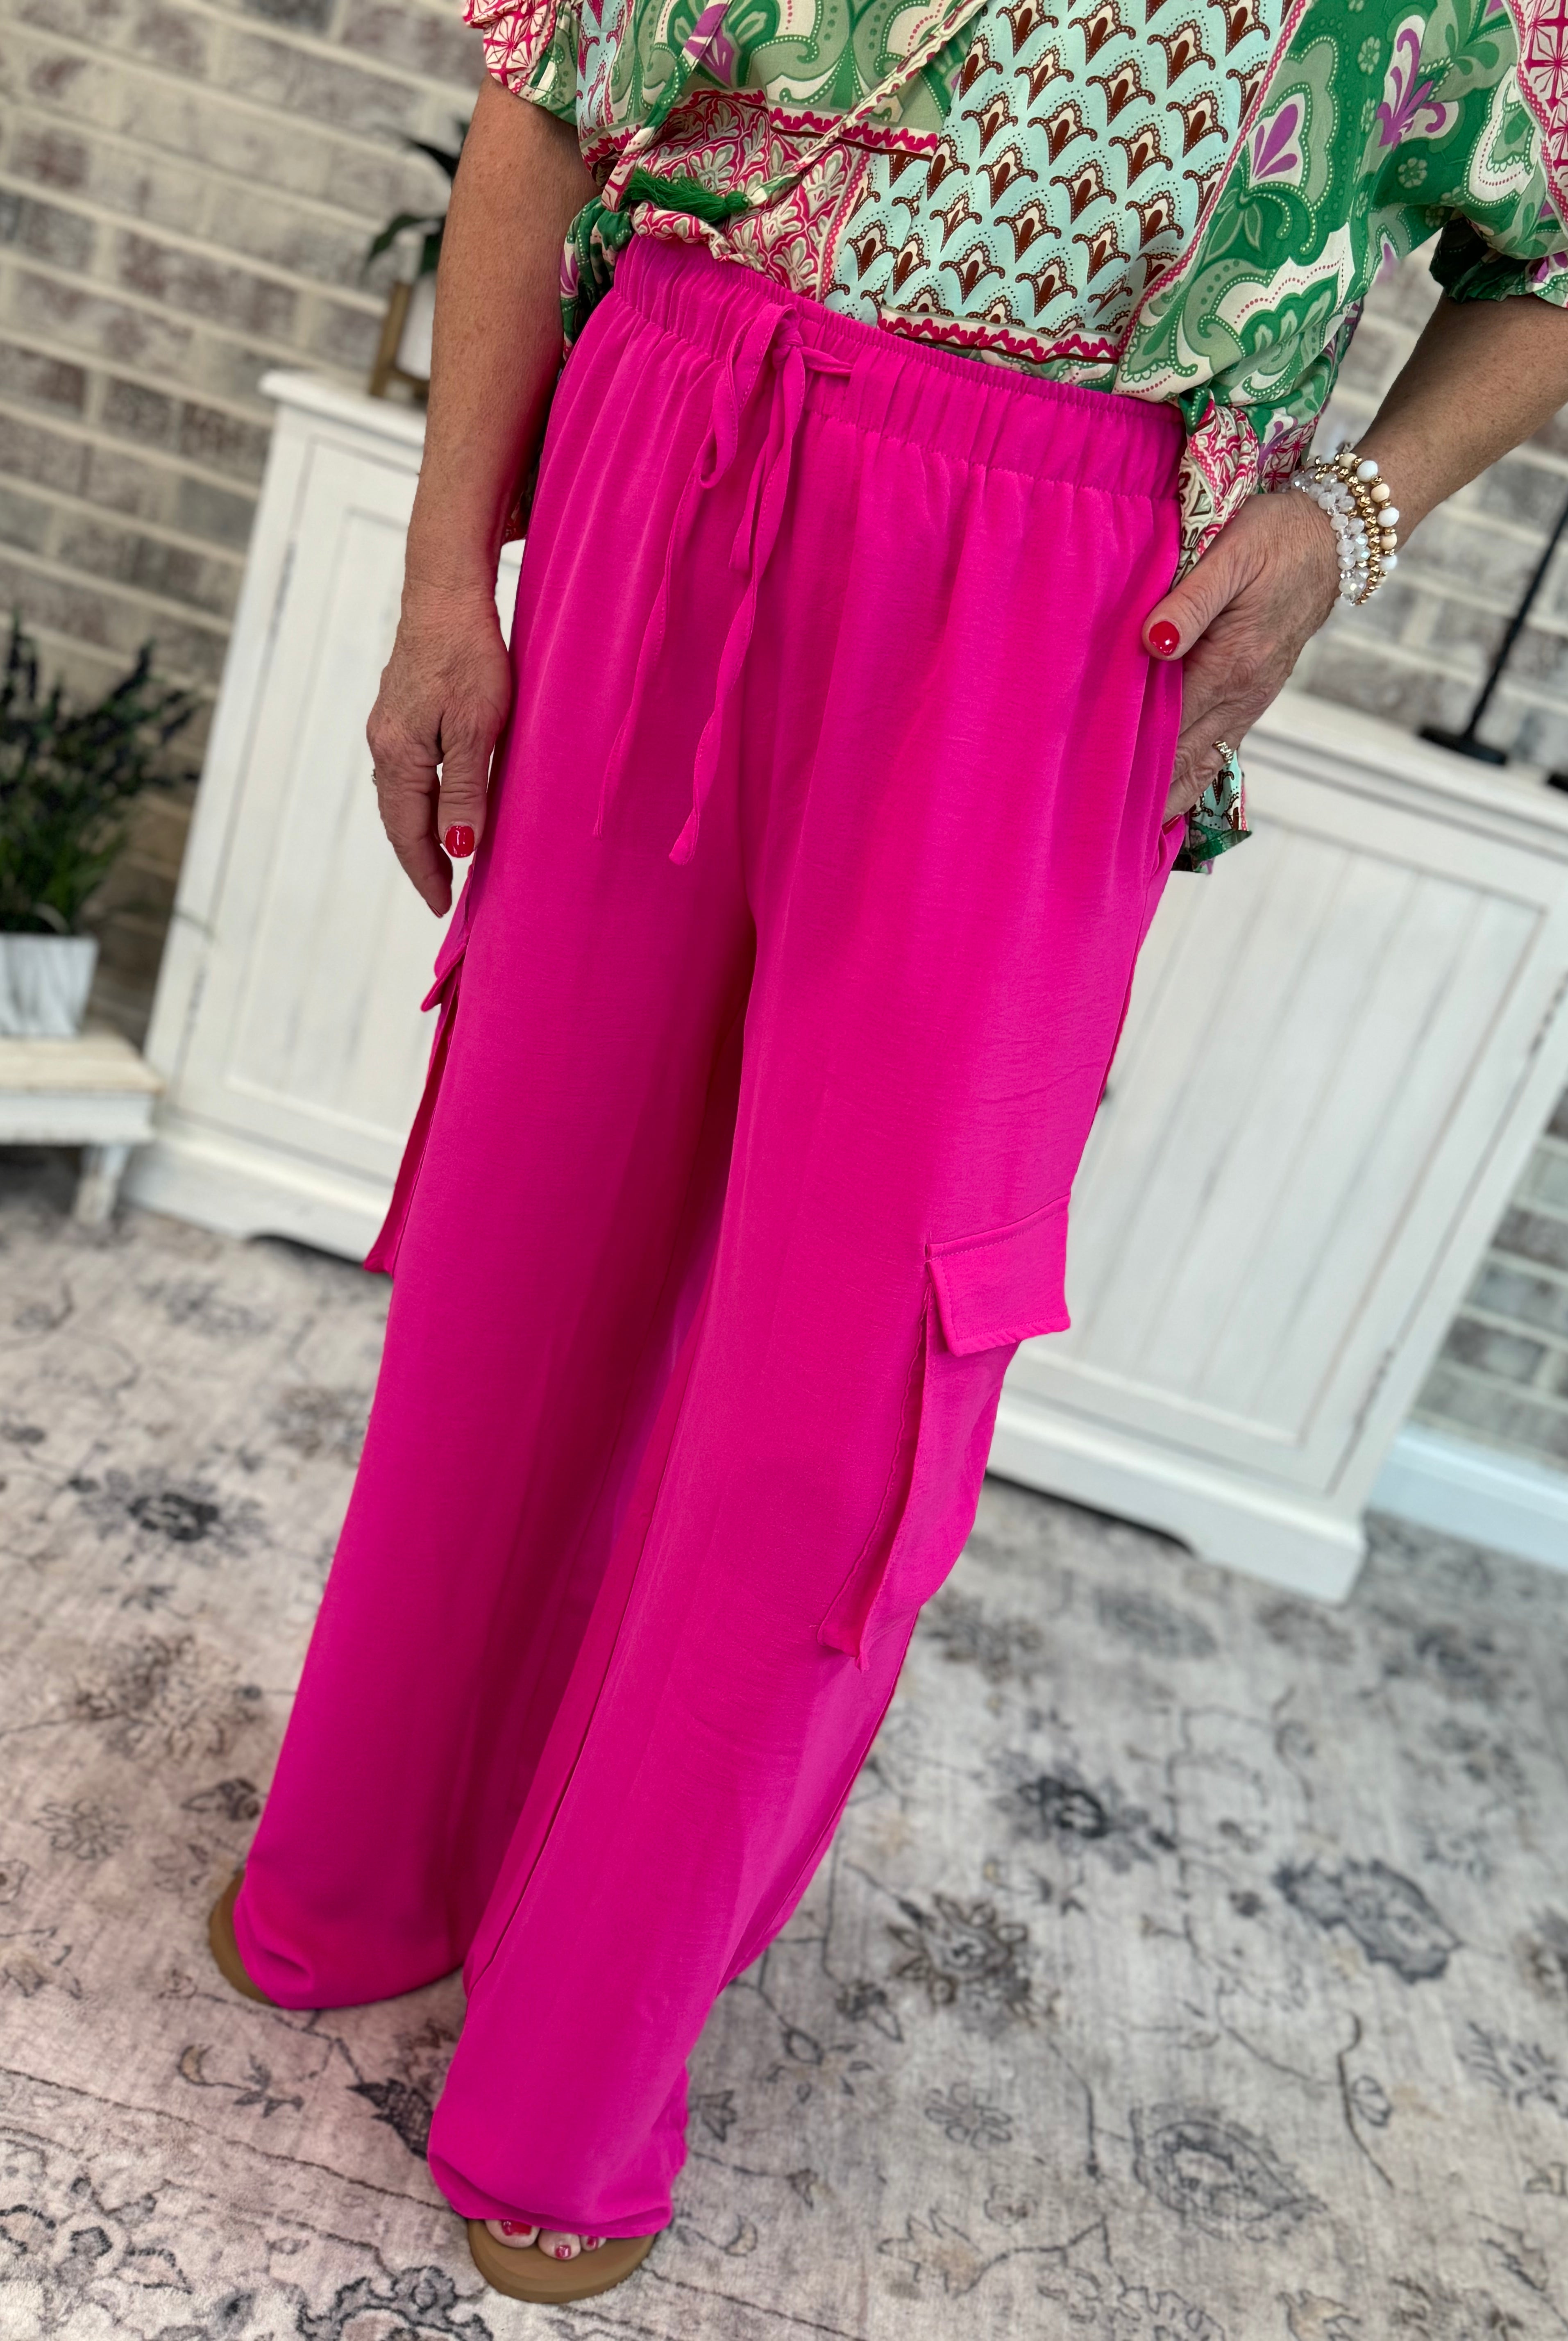 Find Me In The Flowers Cargo Pants-The Lovely Closet-The Lovely Closet, Women's Fashion Boutique in Alexandria, KY